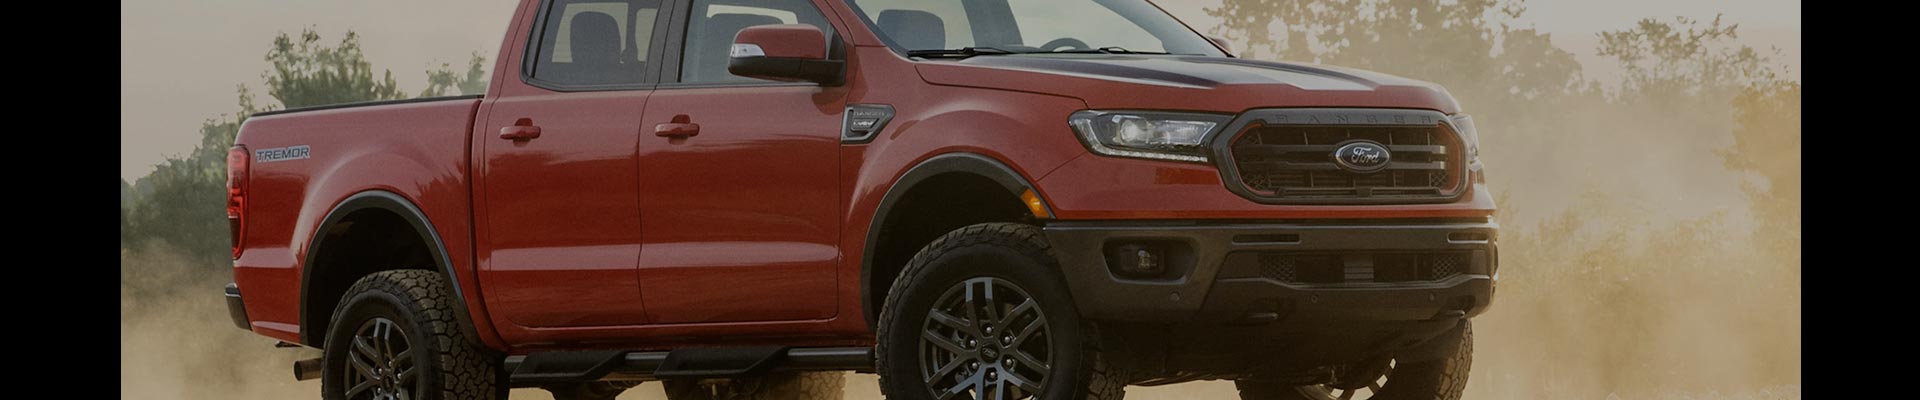 Shop Replacement and OEM 2006 Ford Ranger Parts with Discounted Price on the Net